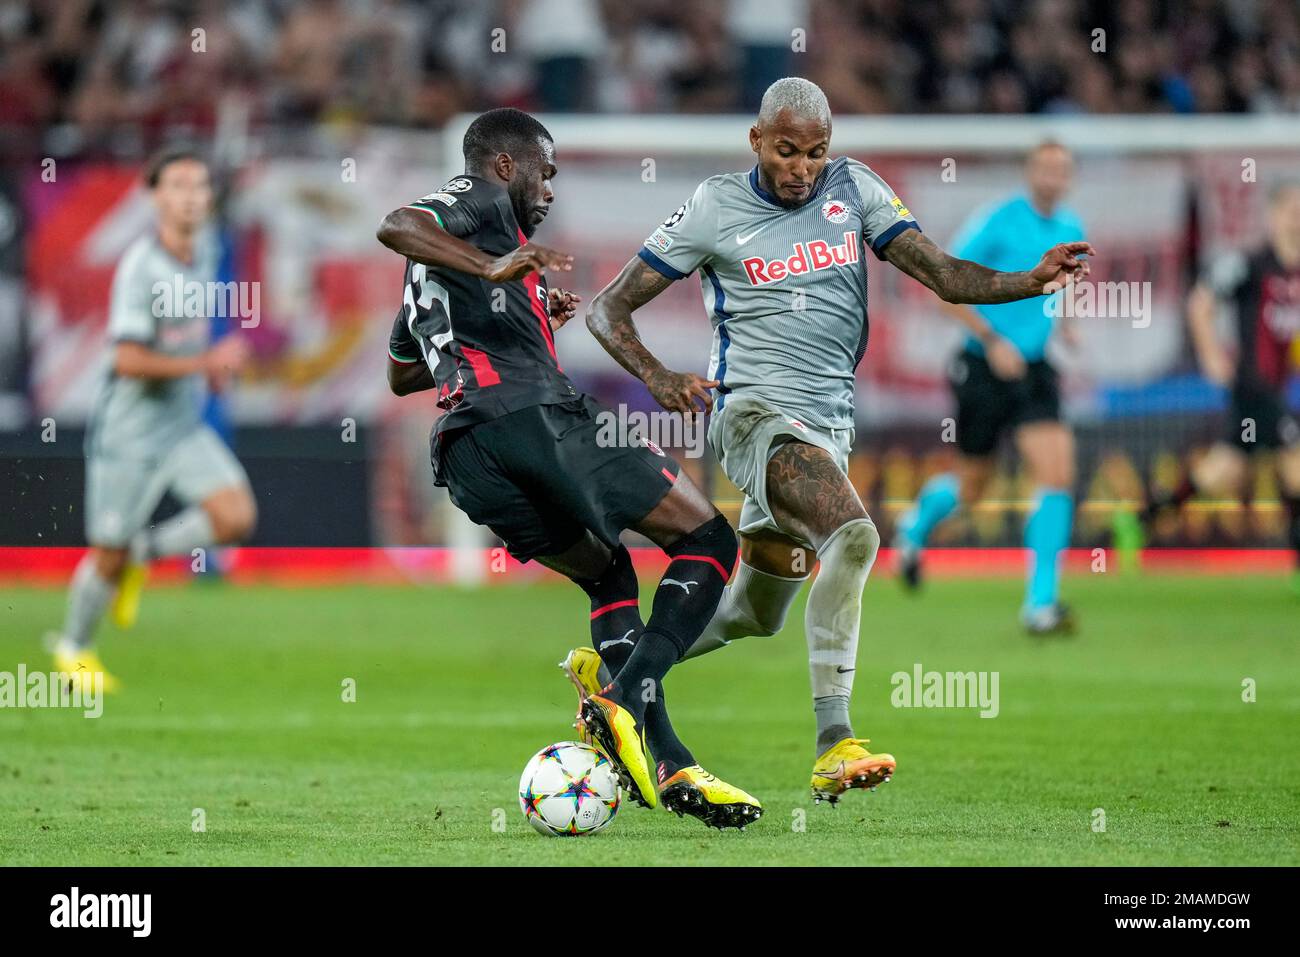 AC Milan's Fikayo Tomori, left, vies for the ball with Salzburg's Fernando  during the Champions League group E soccer match between RB Salzburg and AC  Milan at the Salzburg stadium in Salzburg,